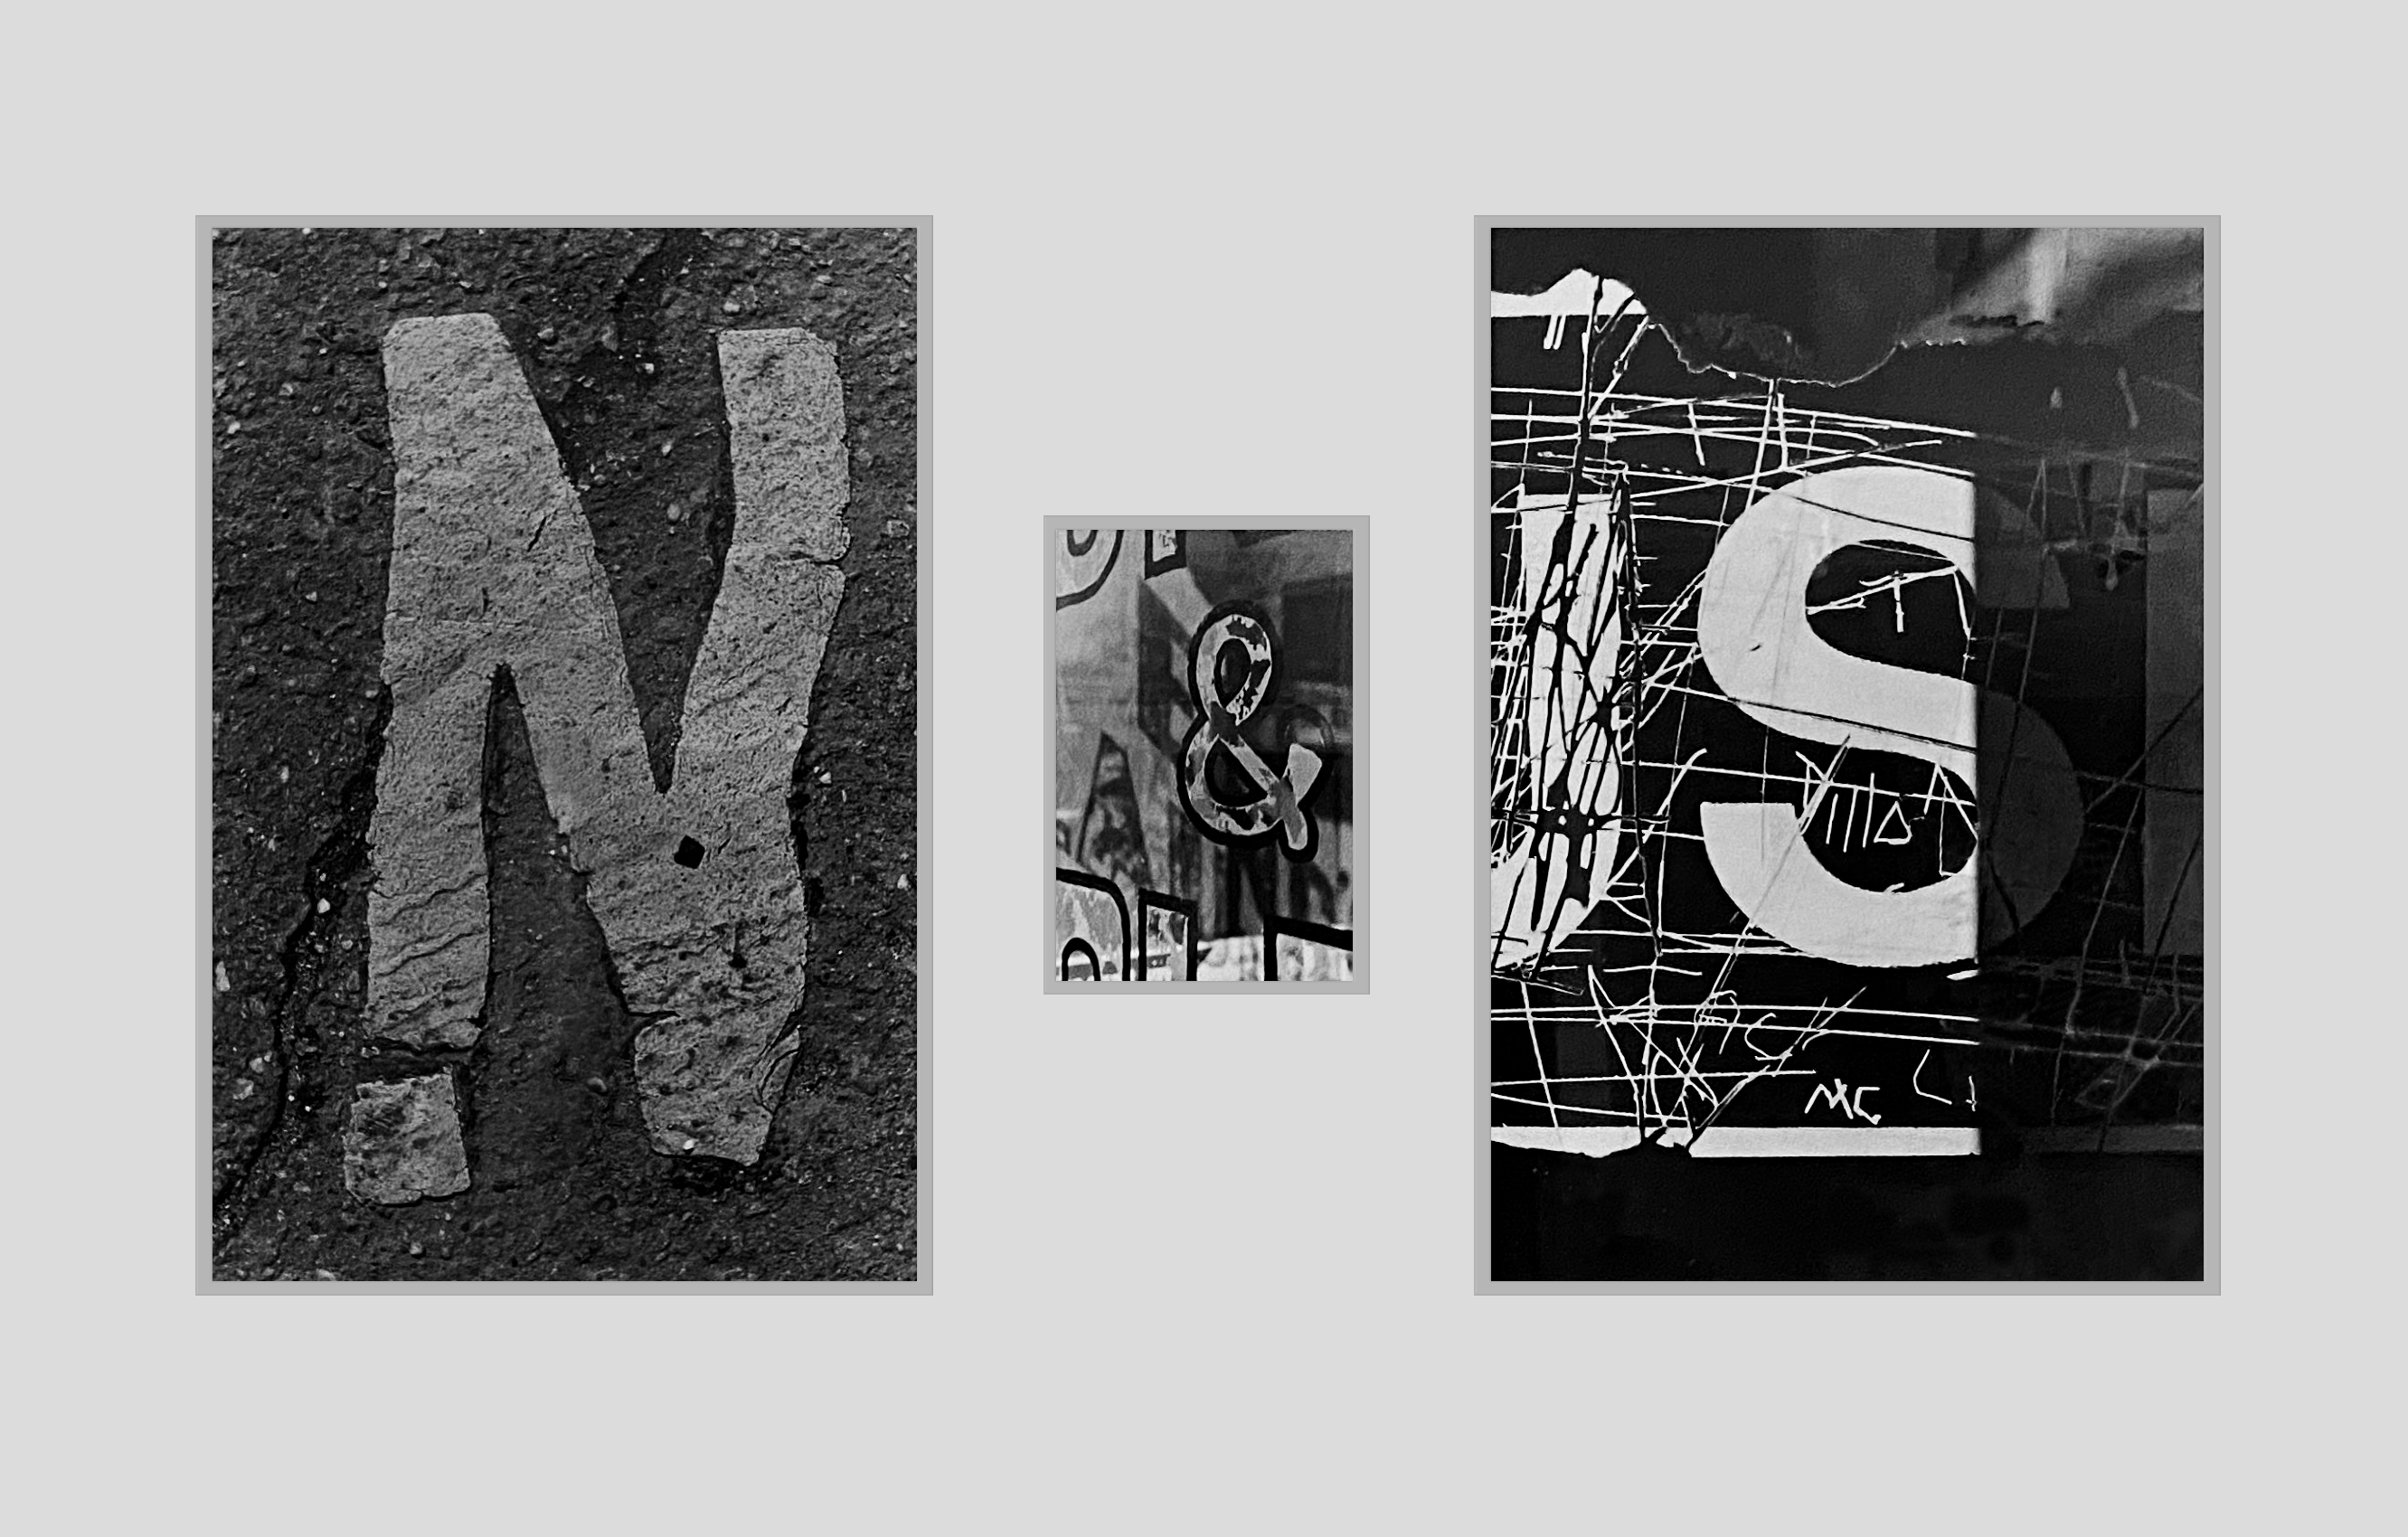 Lee Friedlander black and white photographs, spelling "N and S" for the graphic design firm "Nesnadny and Schwartz"